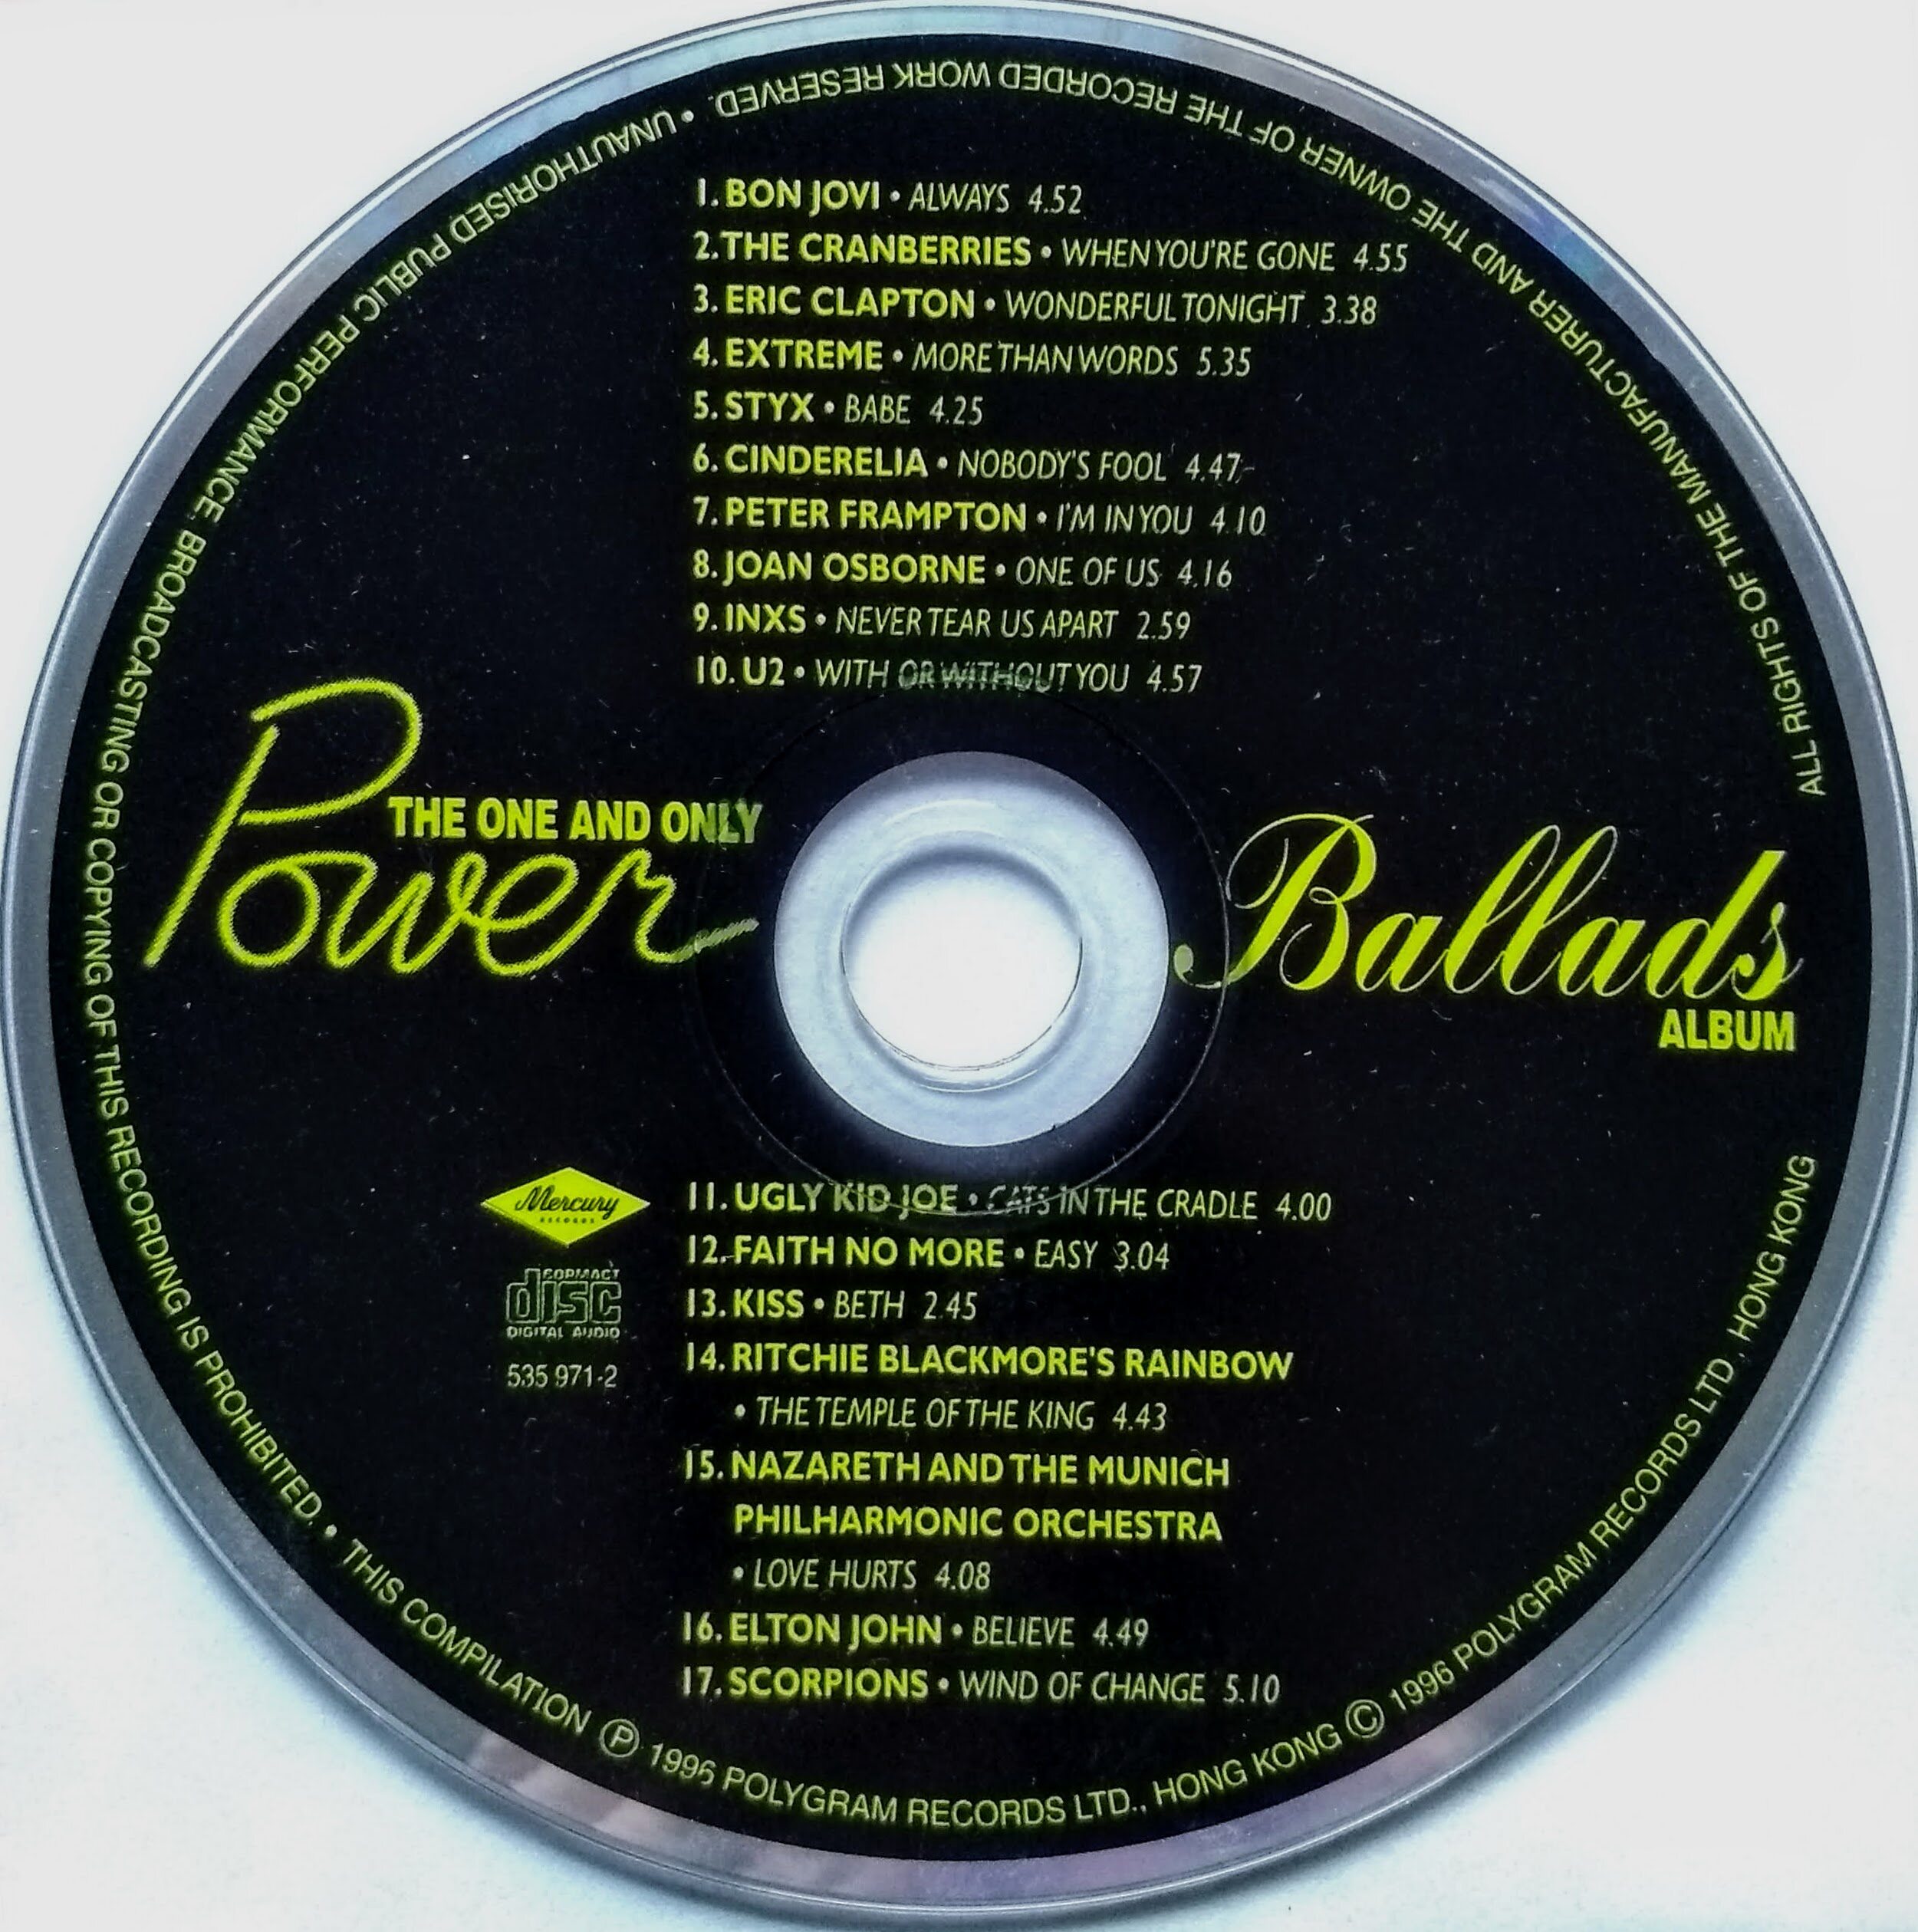 CD (Promotion) Various Artists - The One And Only Ballads  (CD Only)